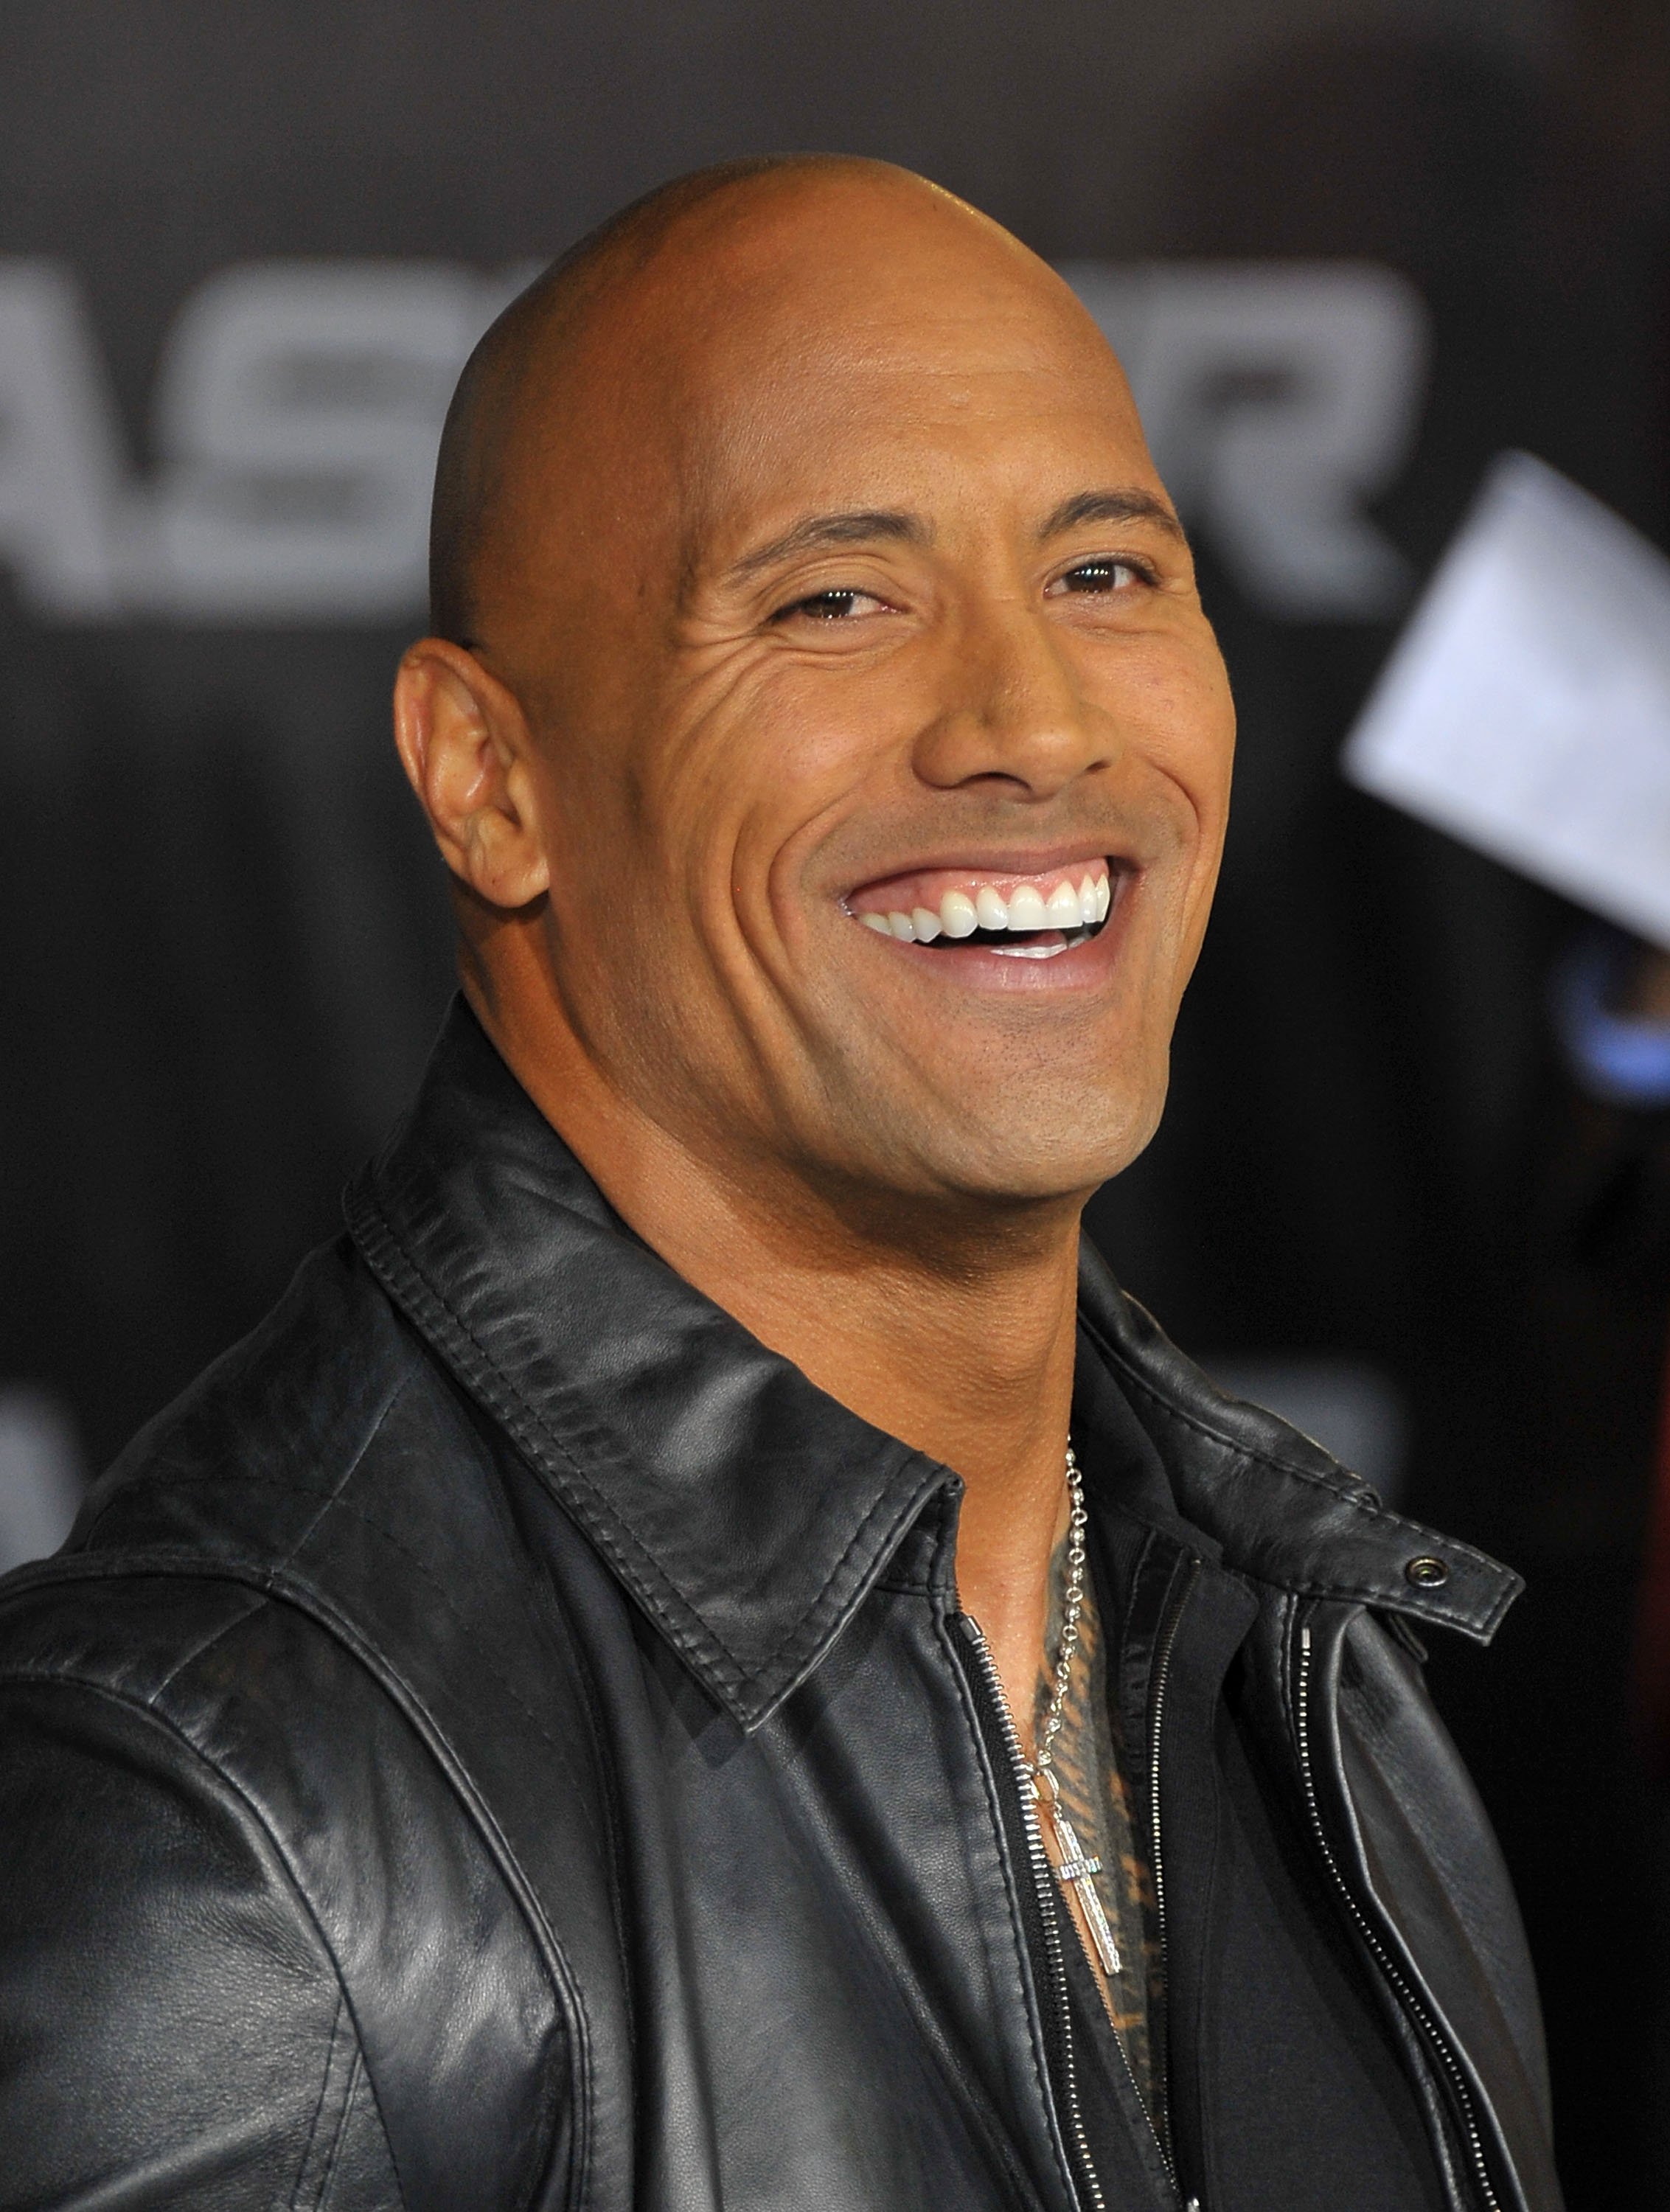 Dwayne Johnson arrives at the "Faster" Los Angeles Premiere at Grauman's Chinese Theatre on November 22, 2010 in Hollywood, California. | Source: Getty Images